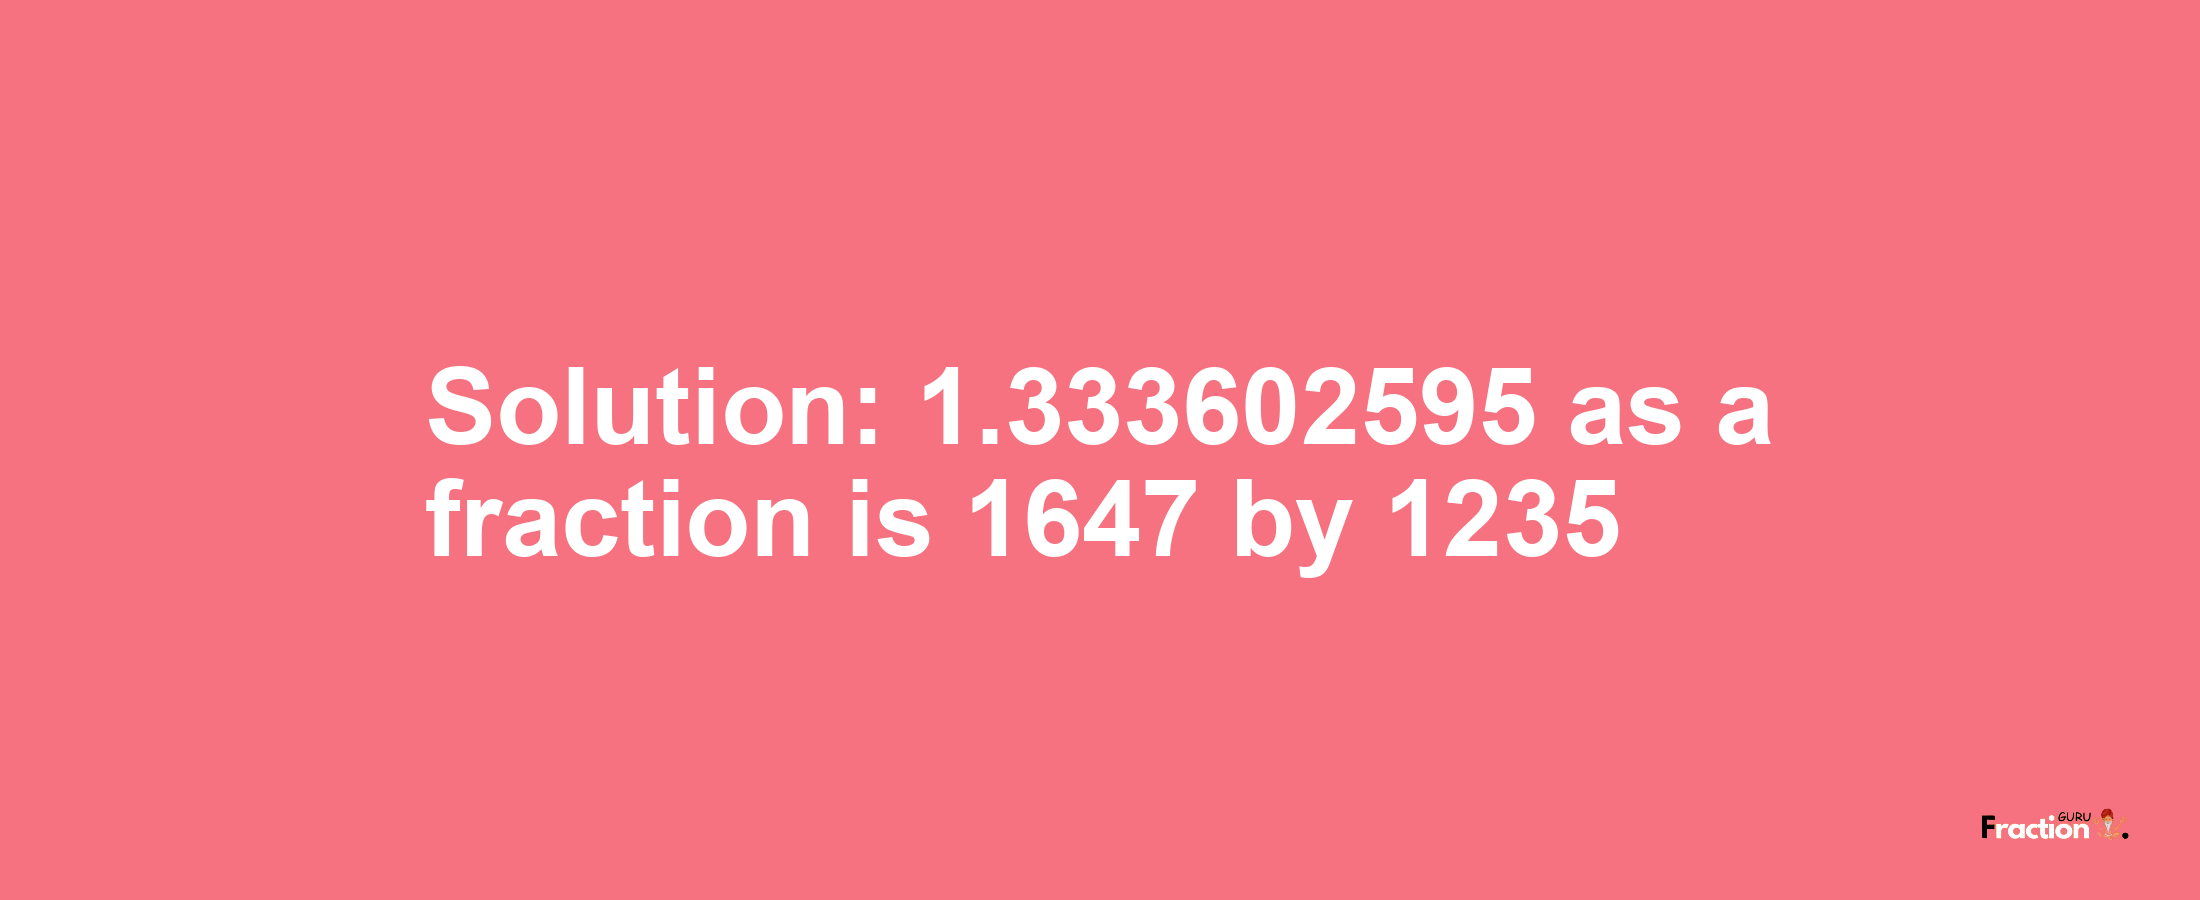 Solution:1.333602595 as a fraction is 1647/1235